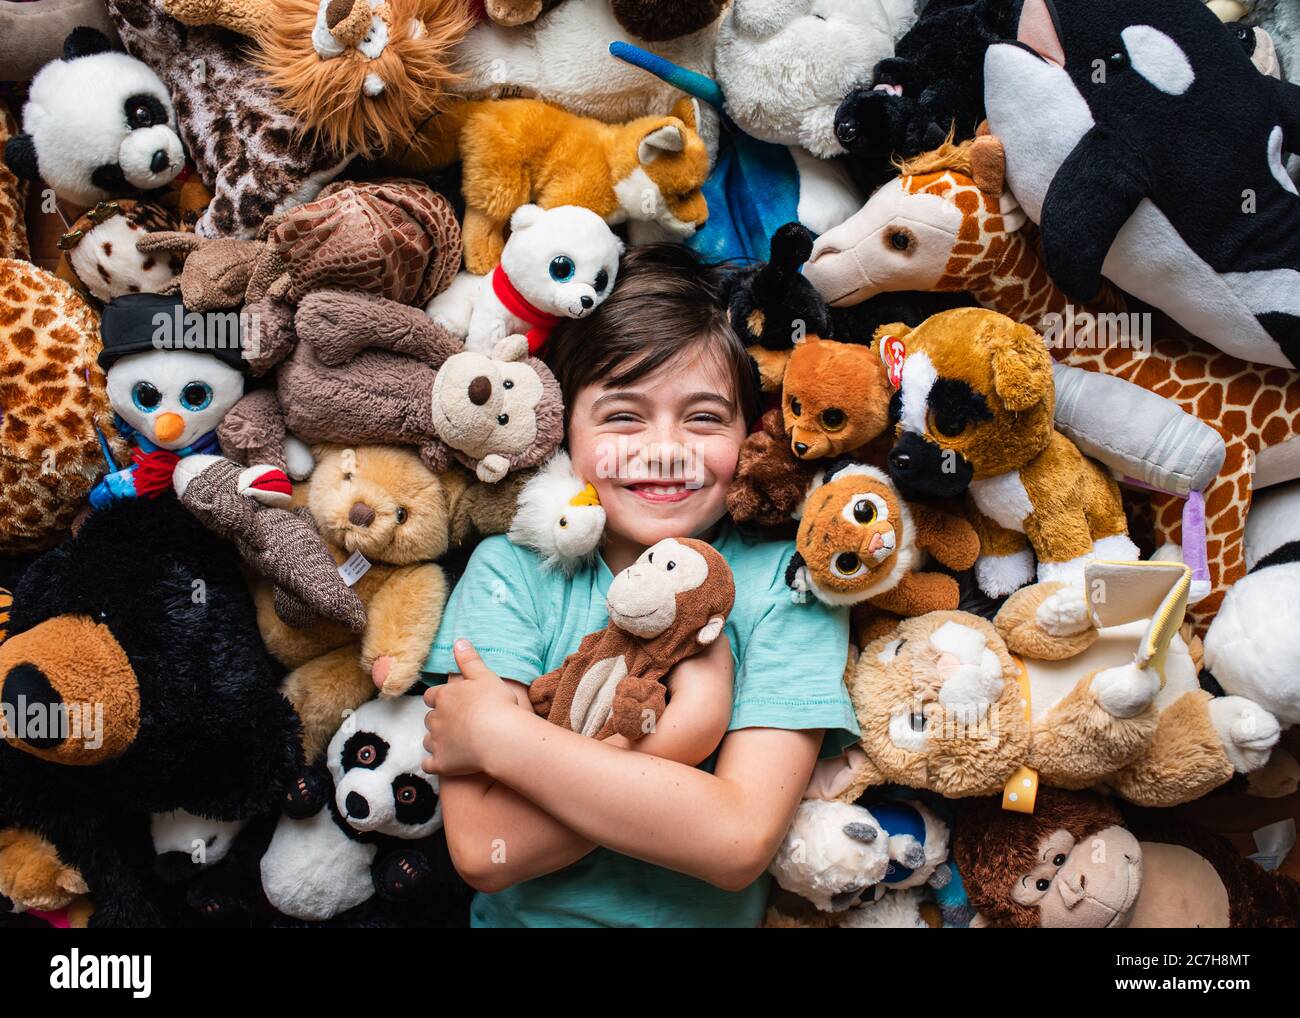 https://c8.alamy.com/comp/2C7H8MT/happy-young-boy-surrounded-by-his-stuffed-animals-shot-from-above-2C7H8MT.jpg